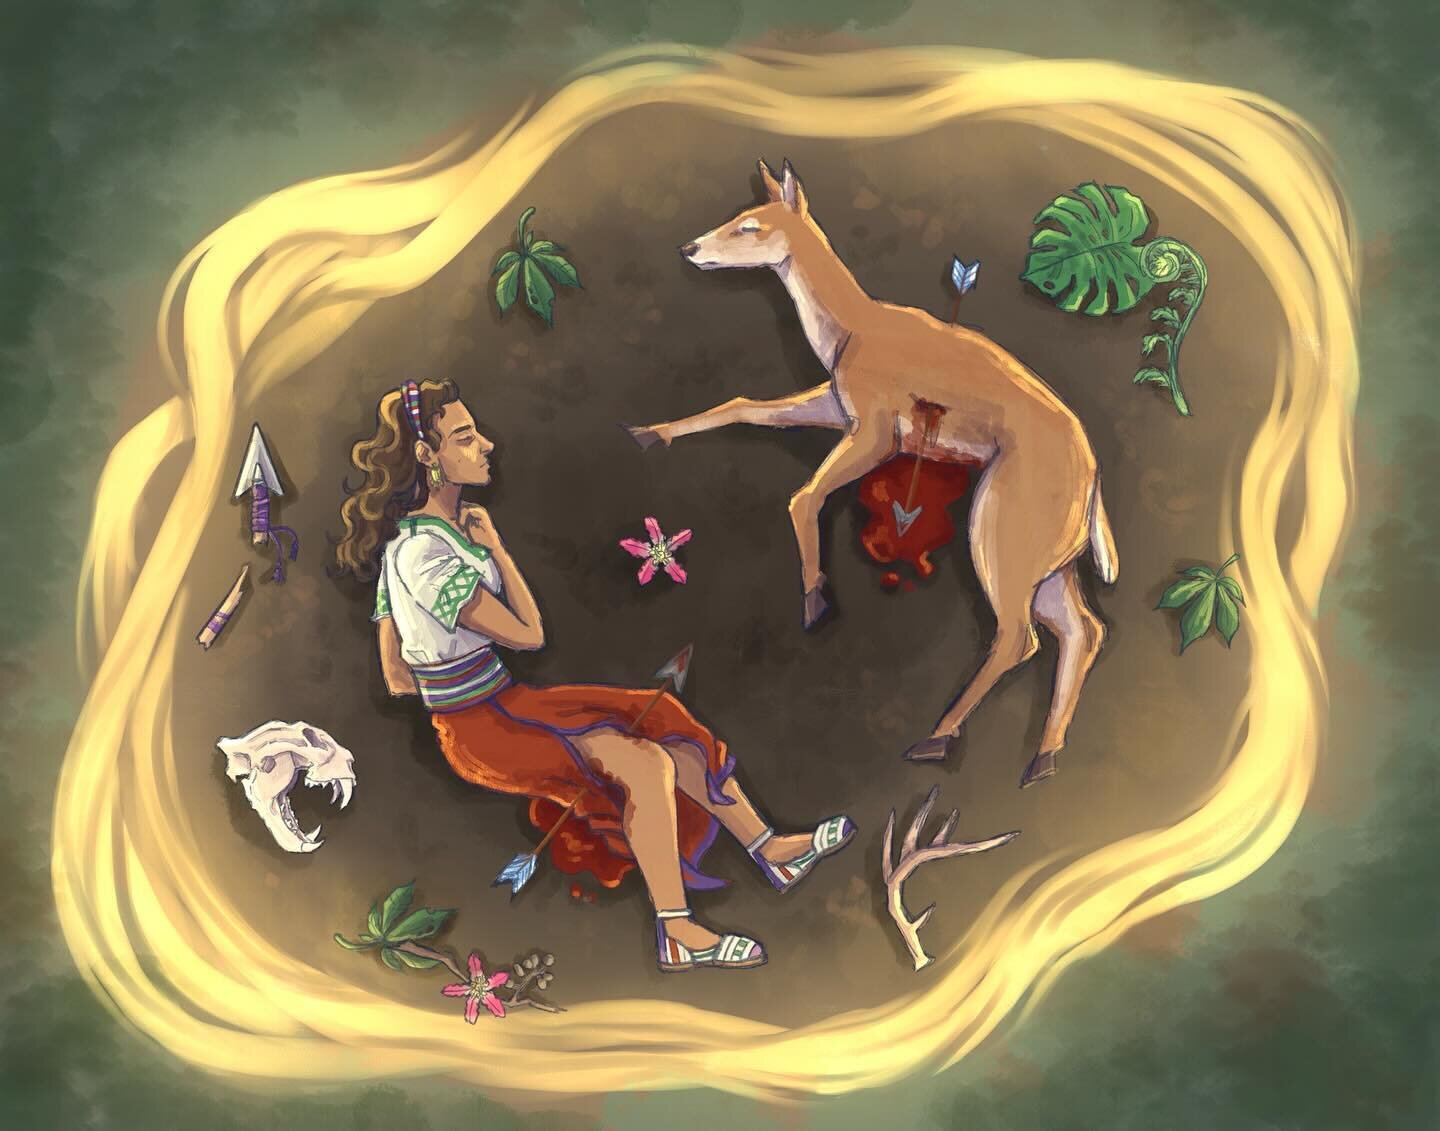 The Cycle of Life 🦌🌳🍃

The second digital piece I did was exploring more on the concept of the Mayan&rsquo;s belief about the white tailed deer. The deer represents the circle of life and death, how we are all the same in the end, no matter who we